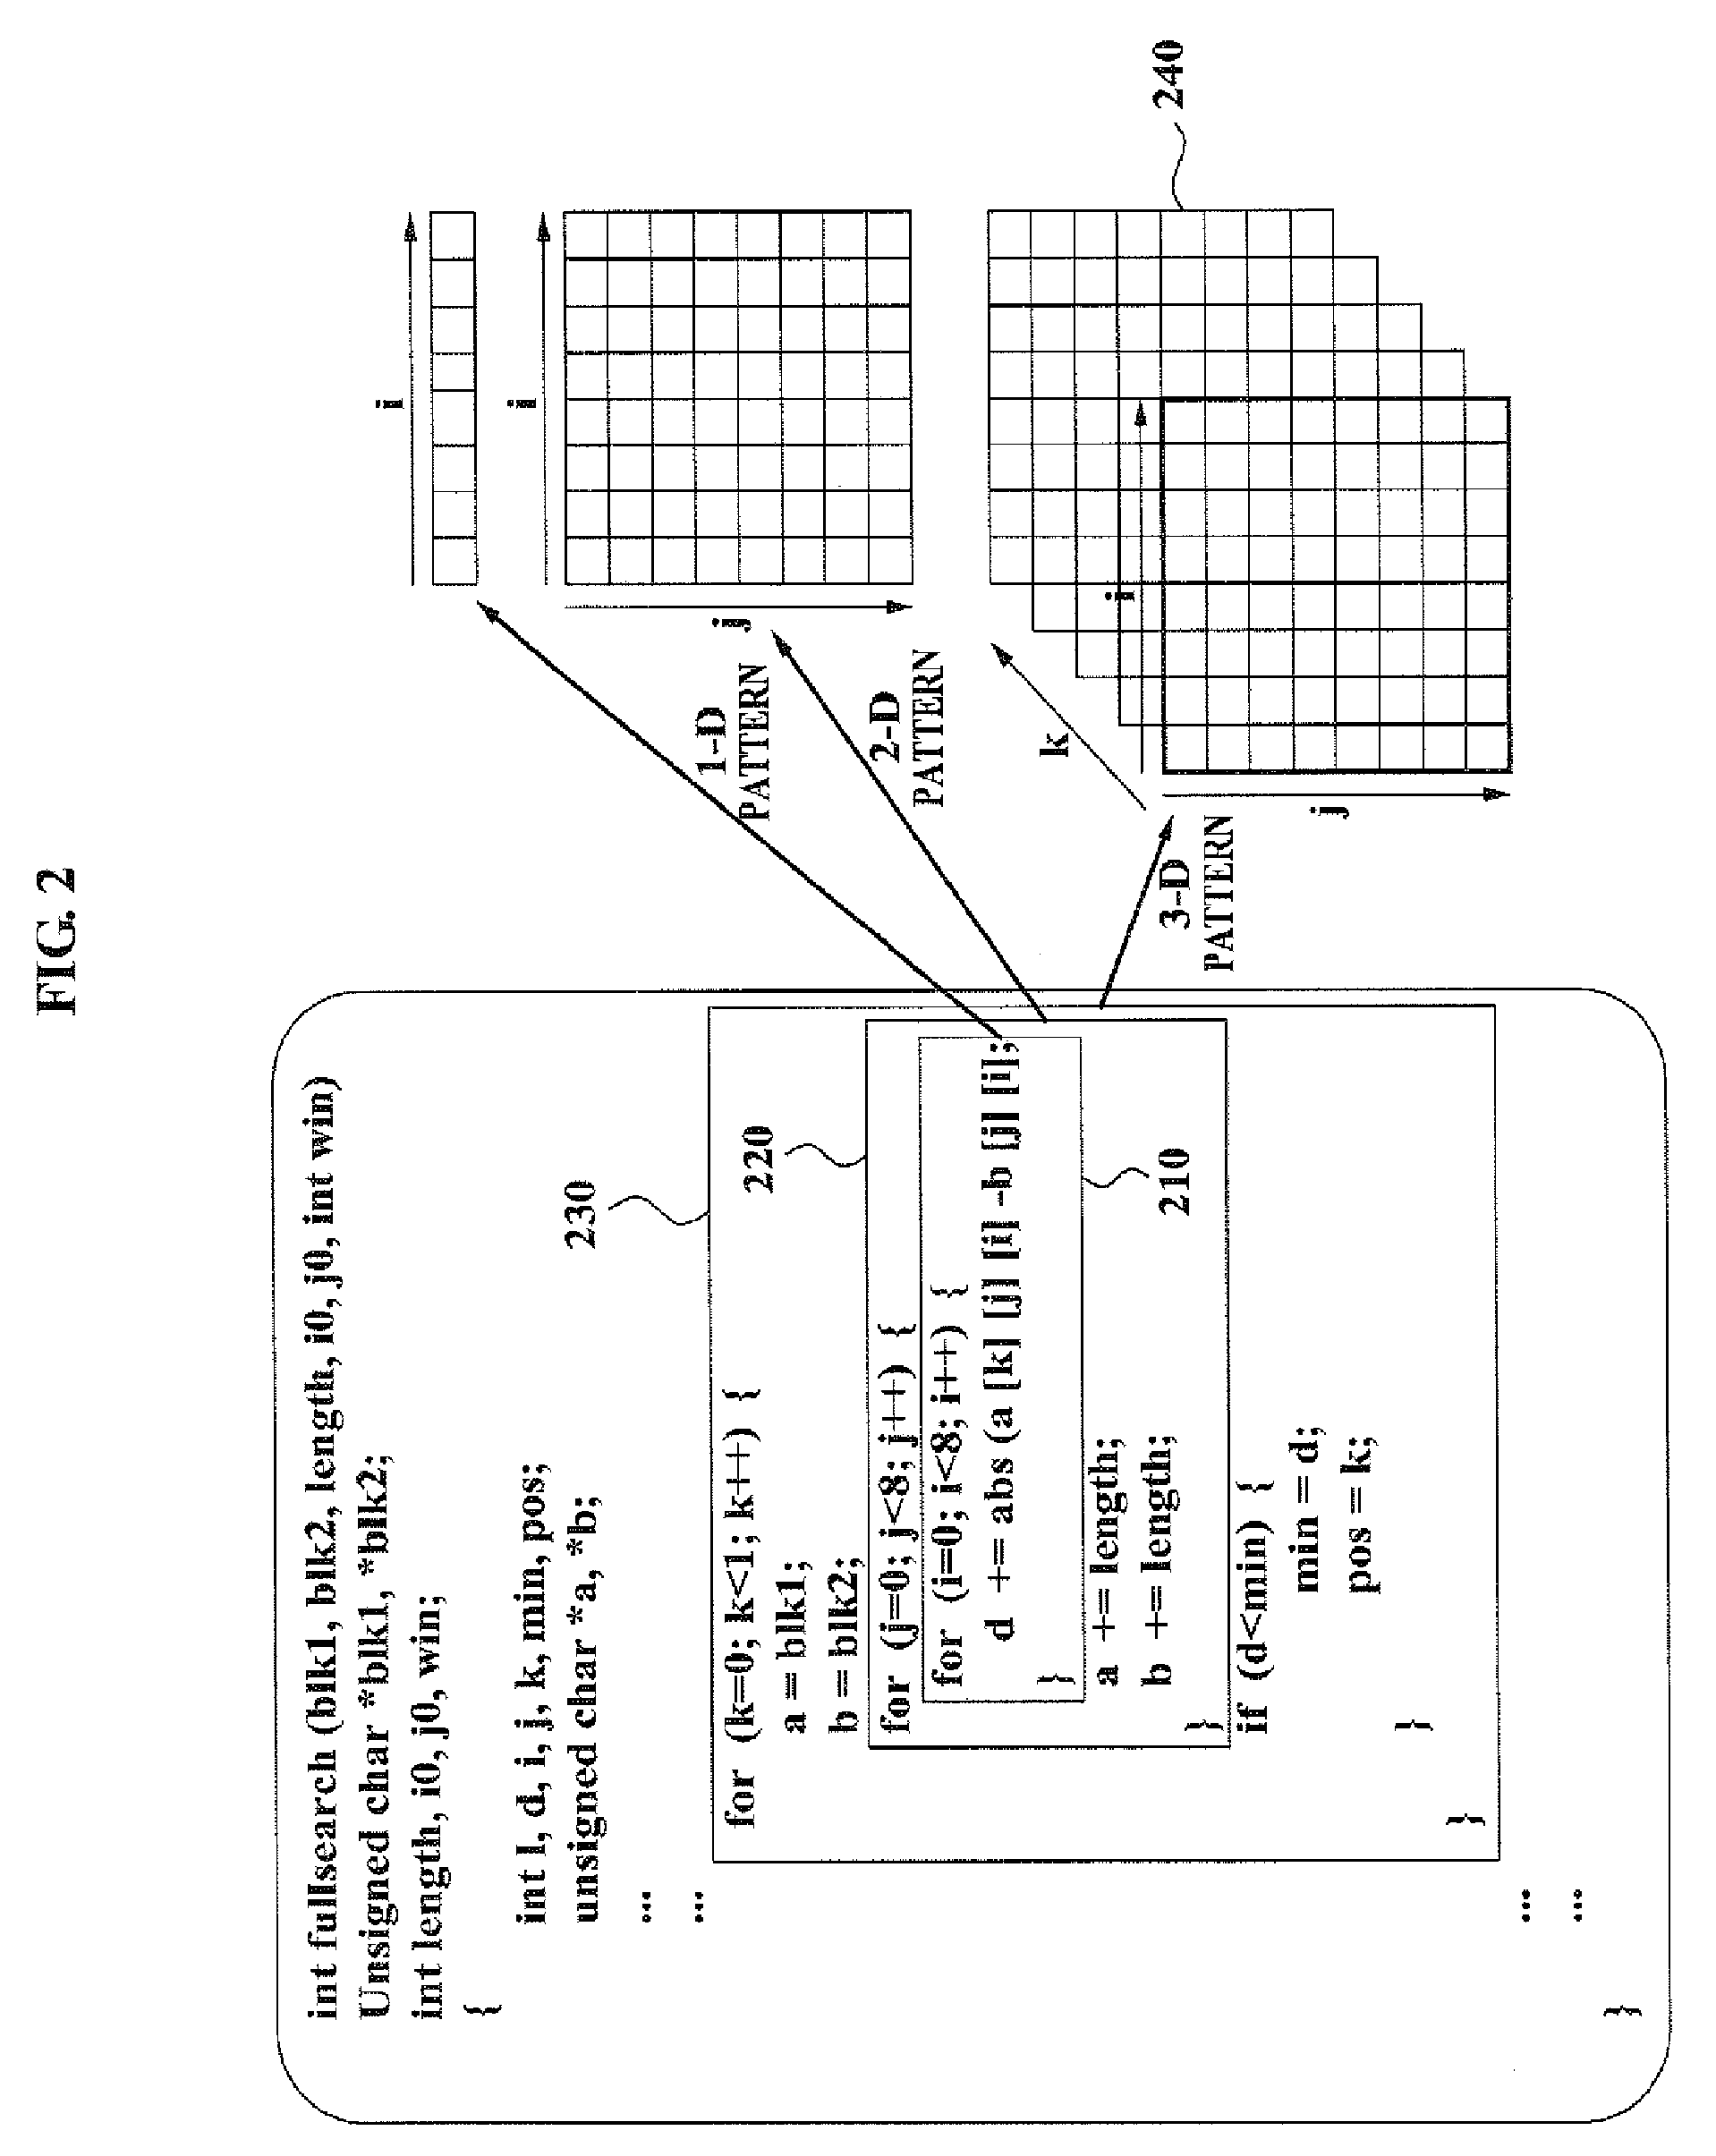 Memory access method using three dimensional address mapping